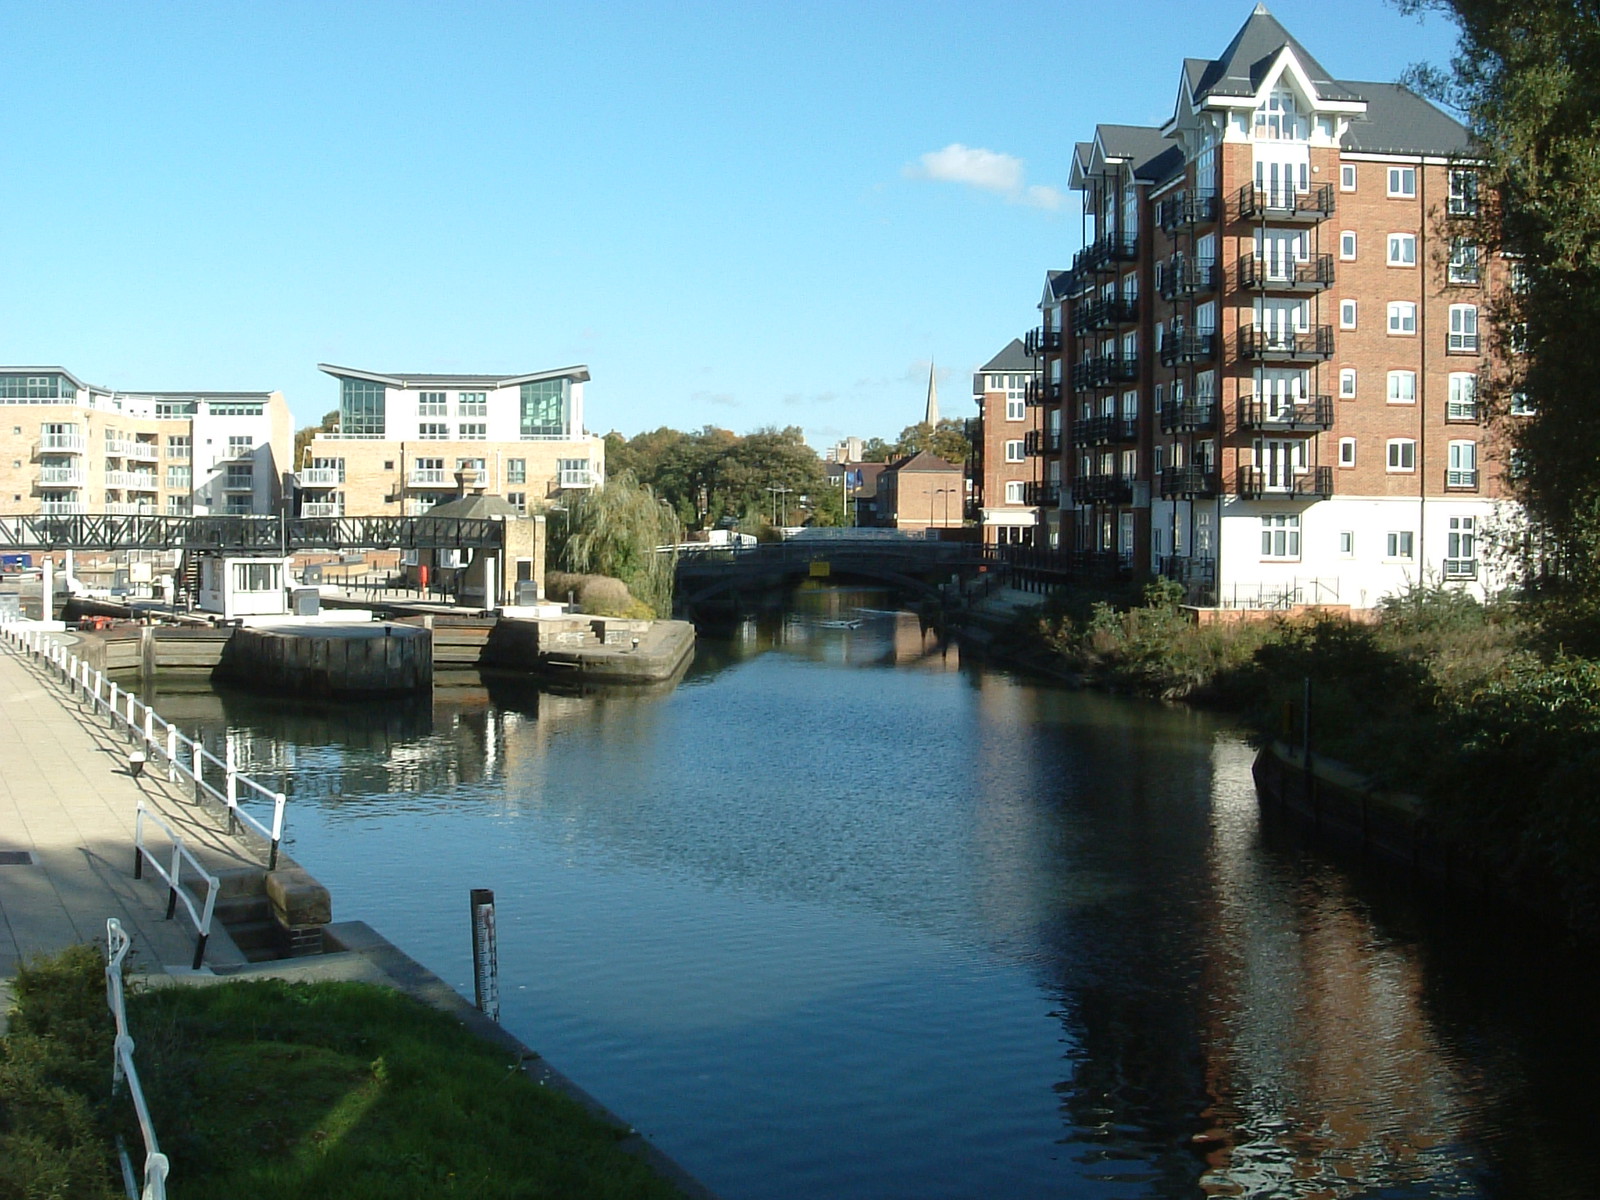 The Grand Union Canal (left) meets the River Brent (right) in Brentford